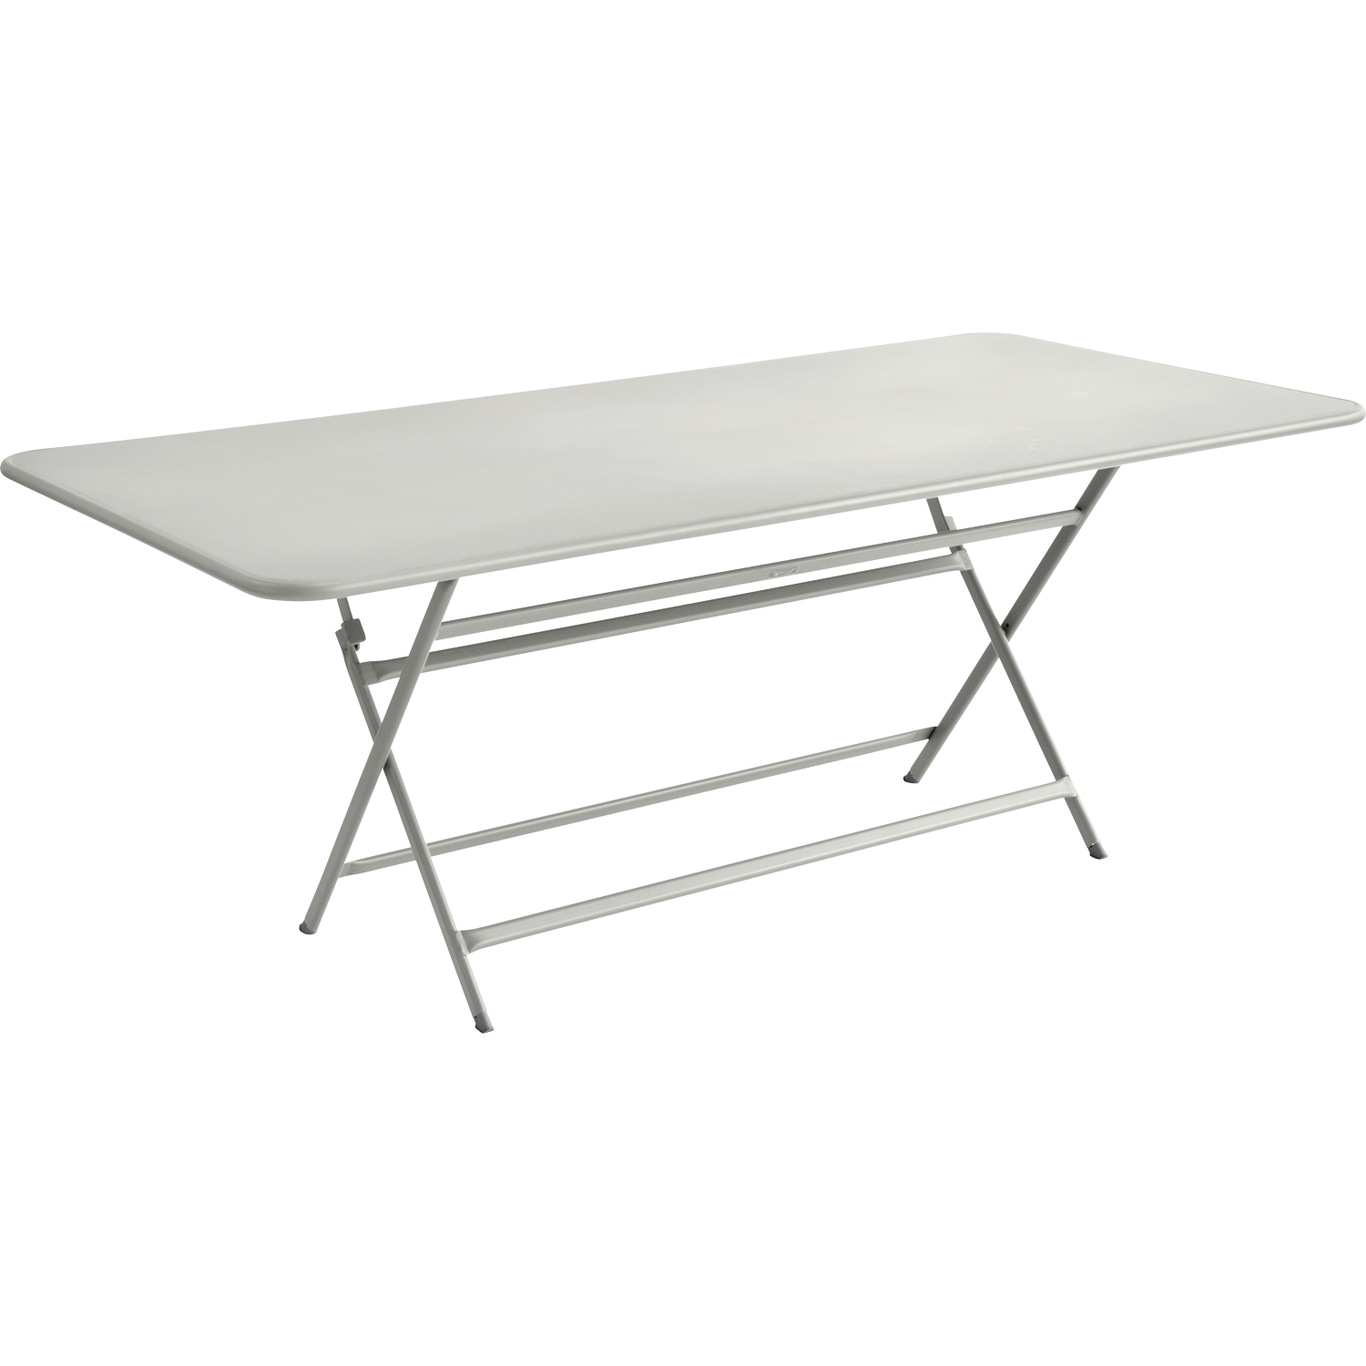 Caractere Table 190X90 cm, Clay Grey